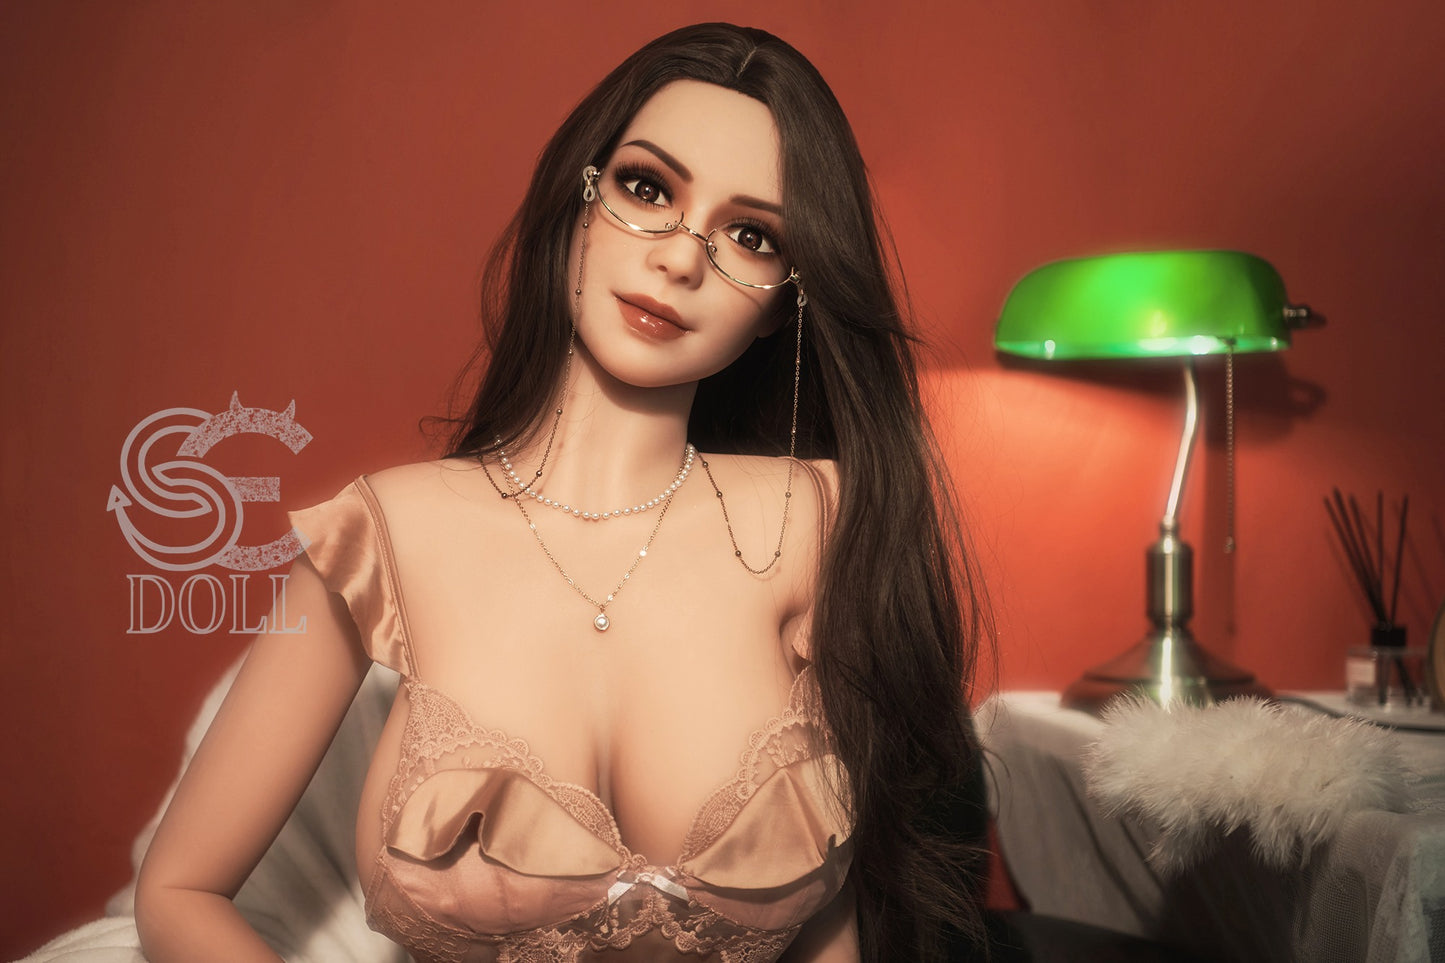 Hot and Nerdy Agnes - TPE Sex Doll with Glasses and Lifelike Texture